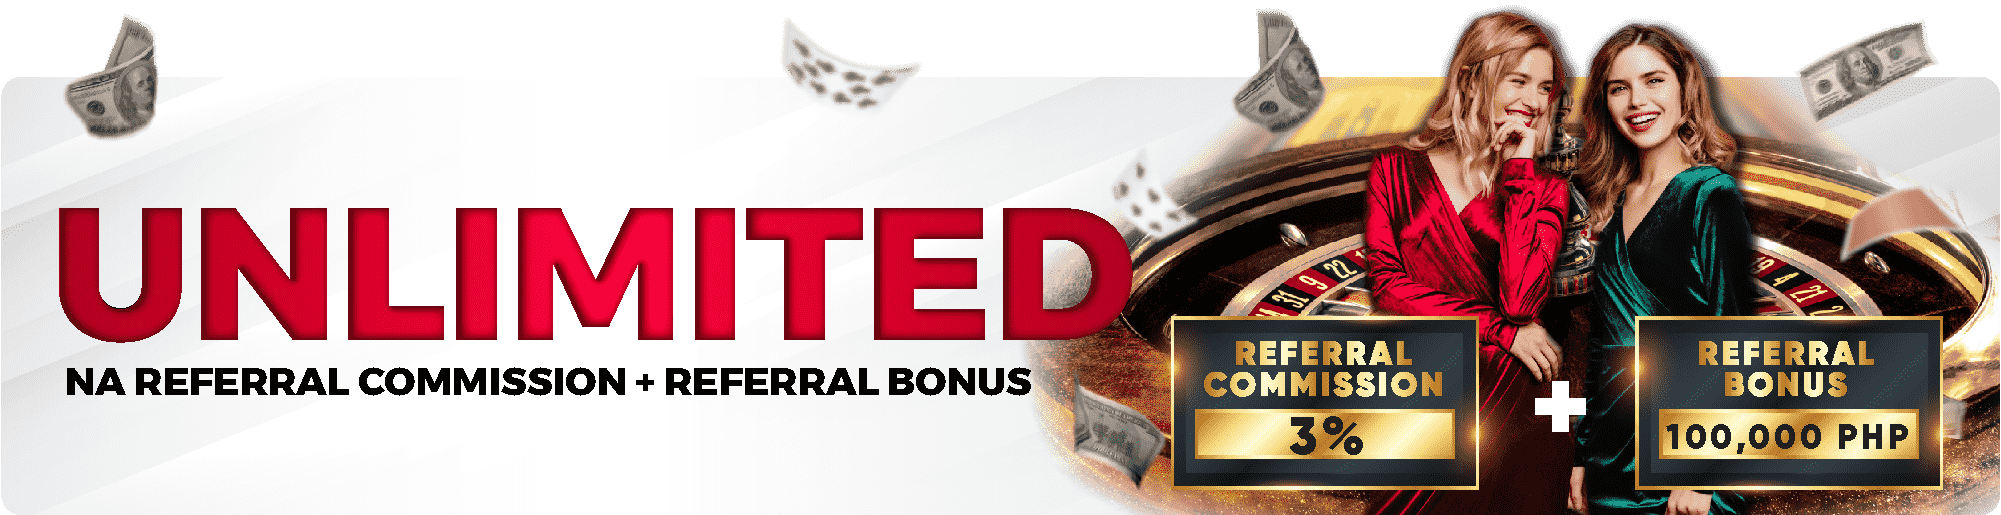 Unlimited na Referral Commission + Referral